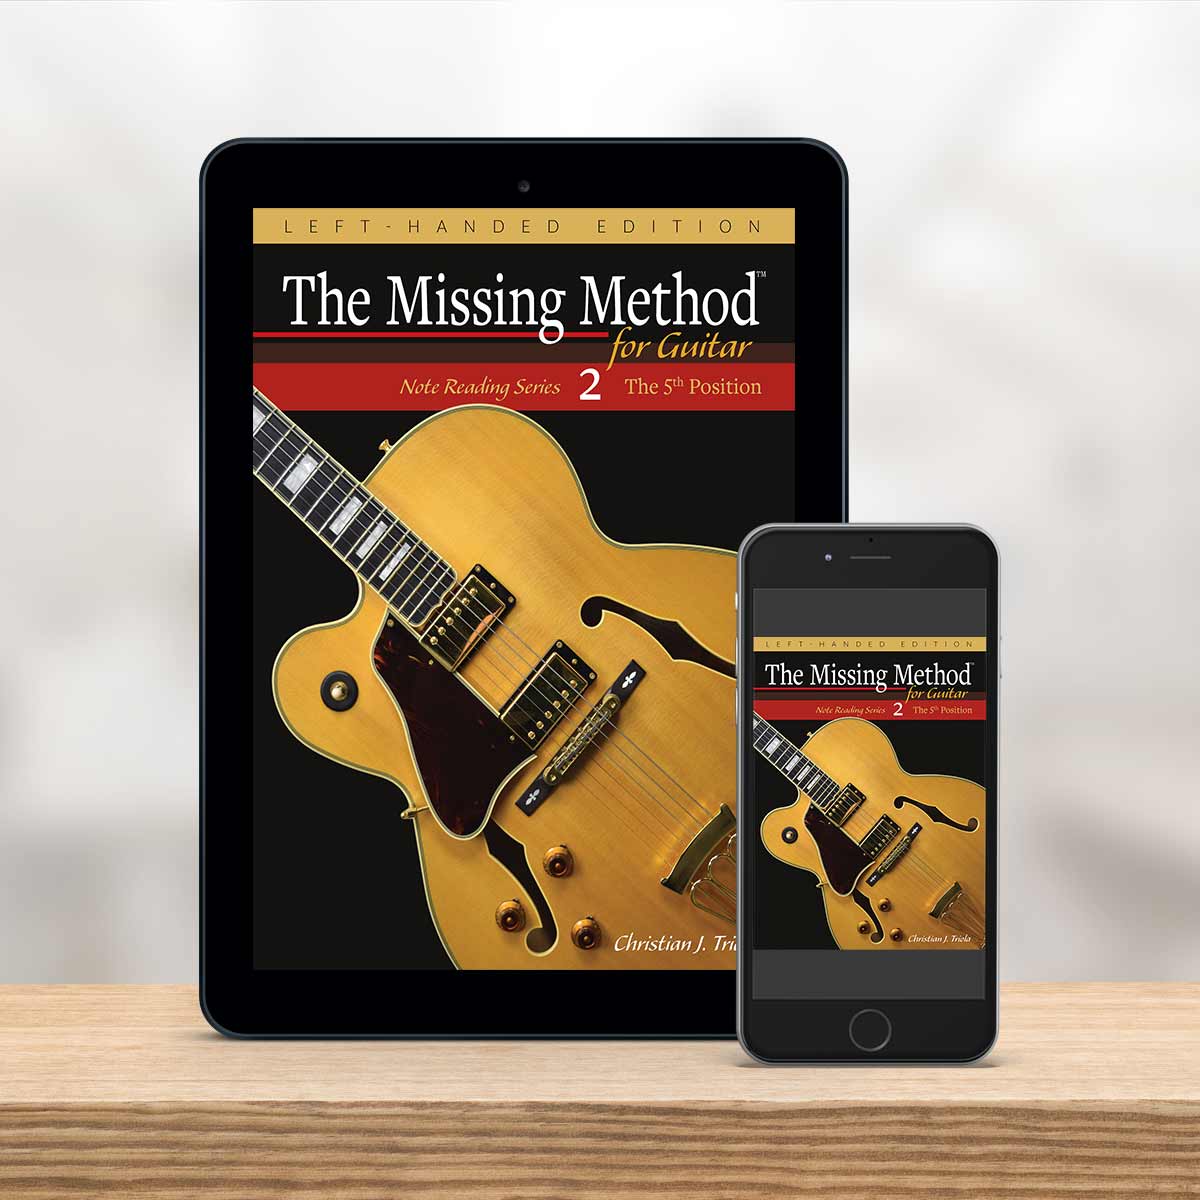 Digital Tablet and smartphone showing the cover of The Missing Method for Guitar Note Reading Series Book 2, Left-Handed Edition by Christian Triola